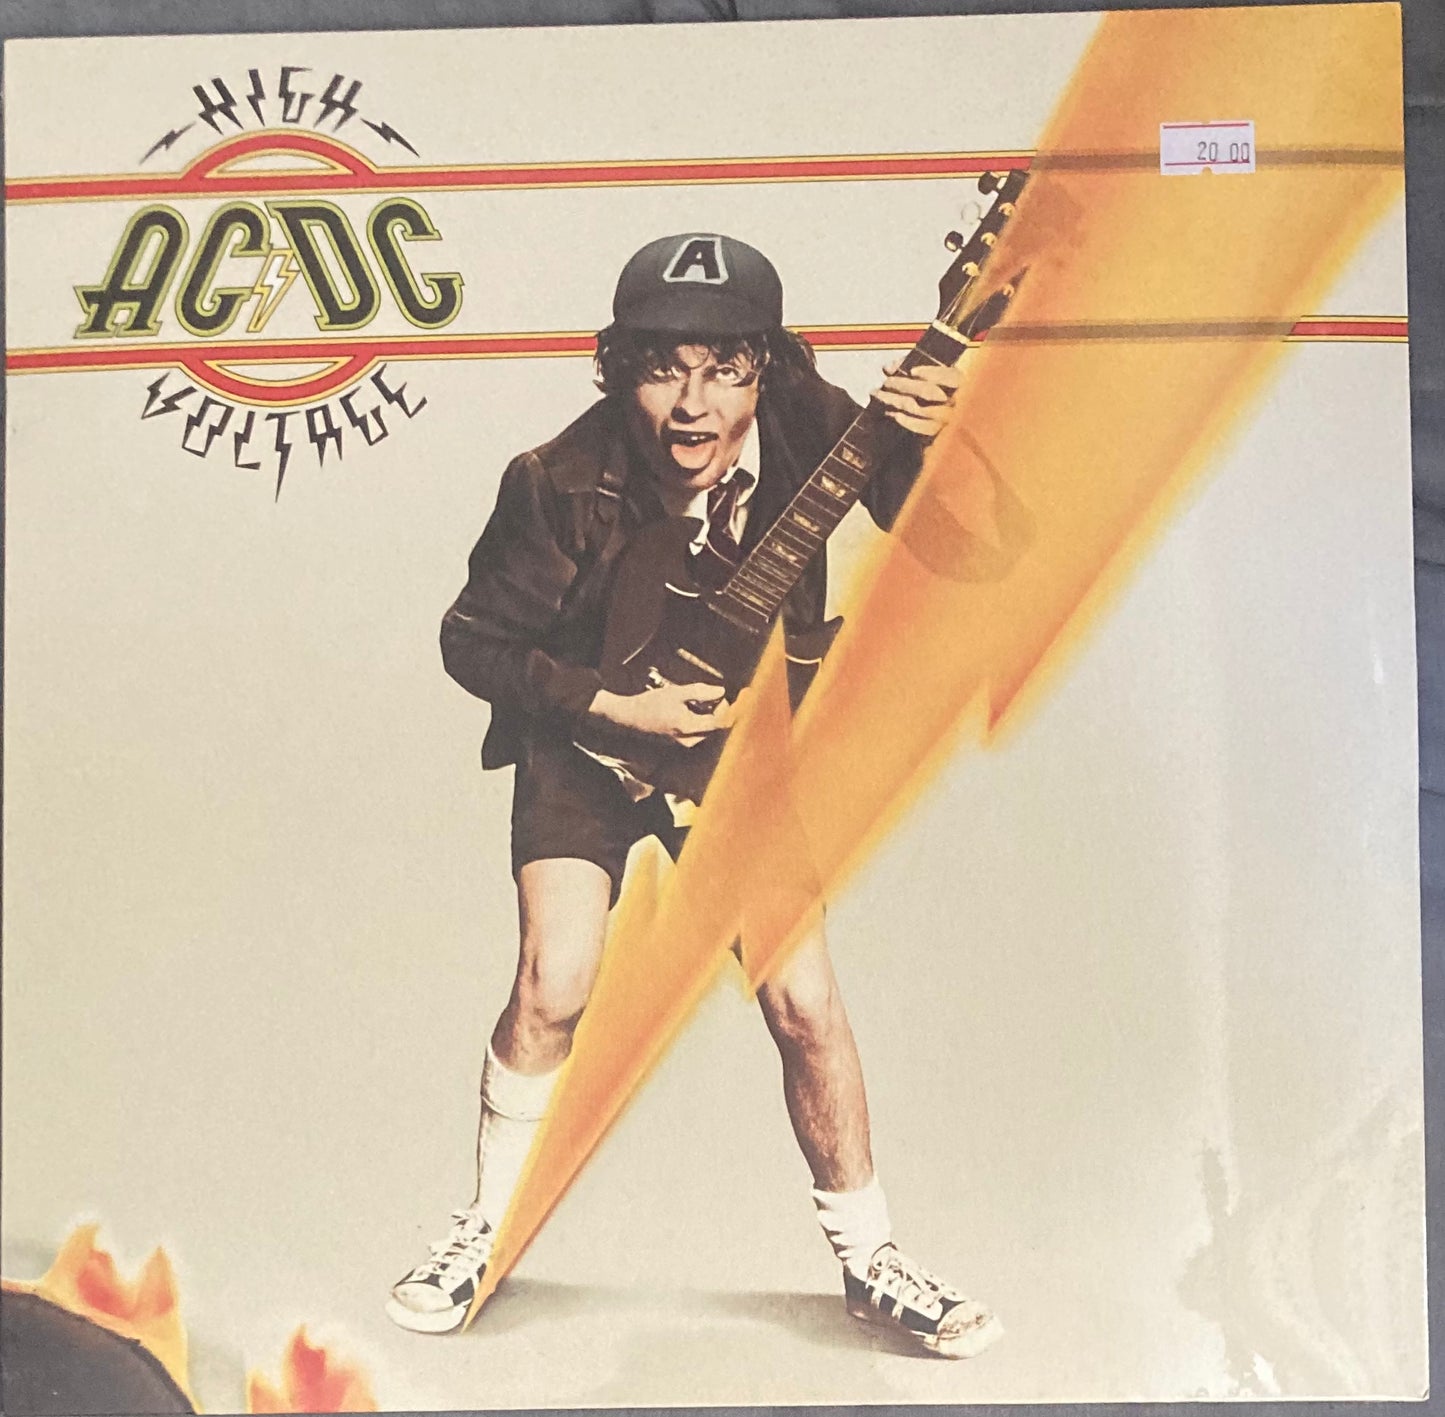 The front of 'AC/DC High Voltage' on vinyl